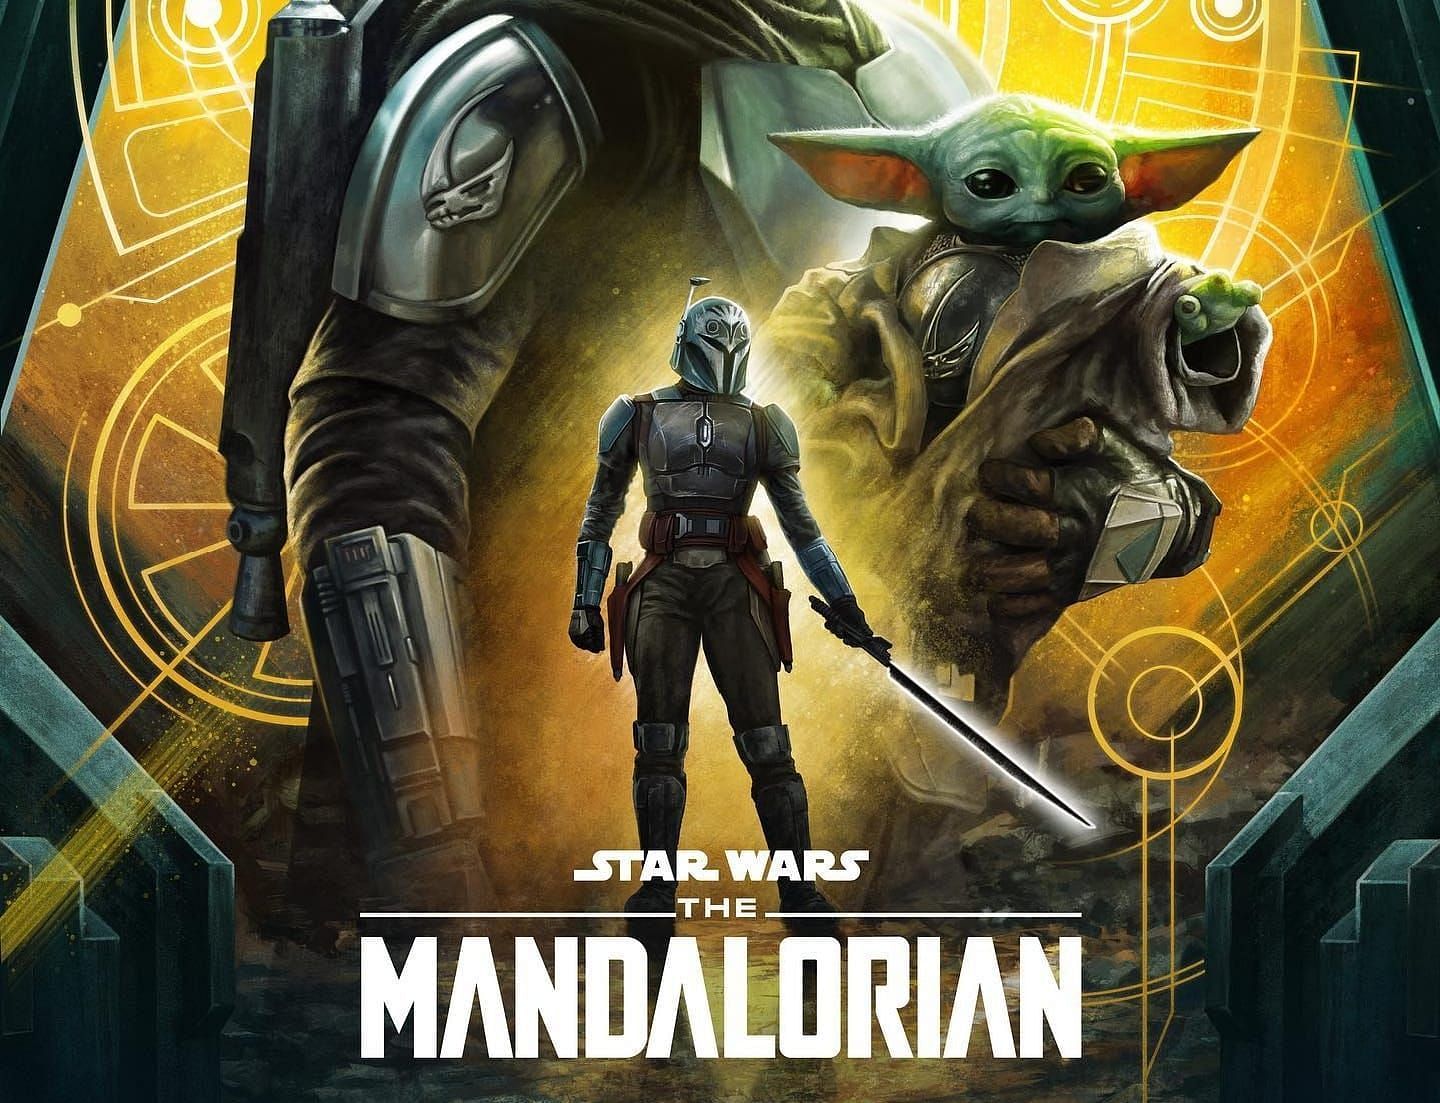 Source- The Mandalorian Instagram page